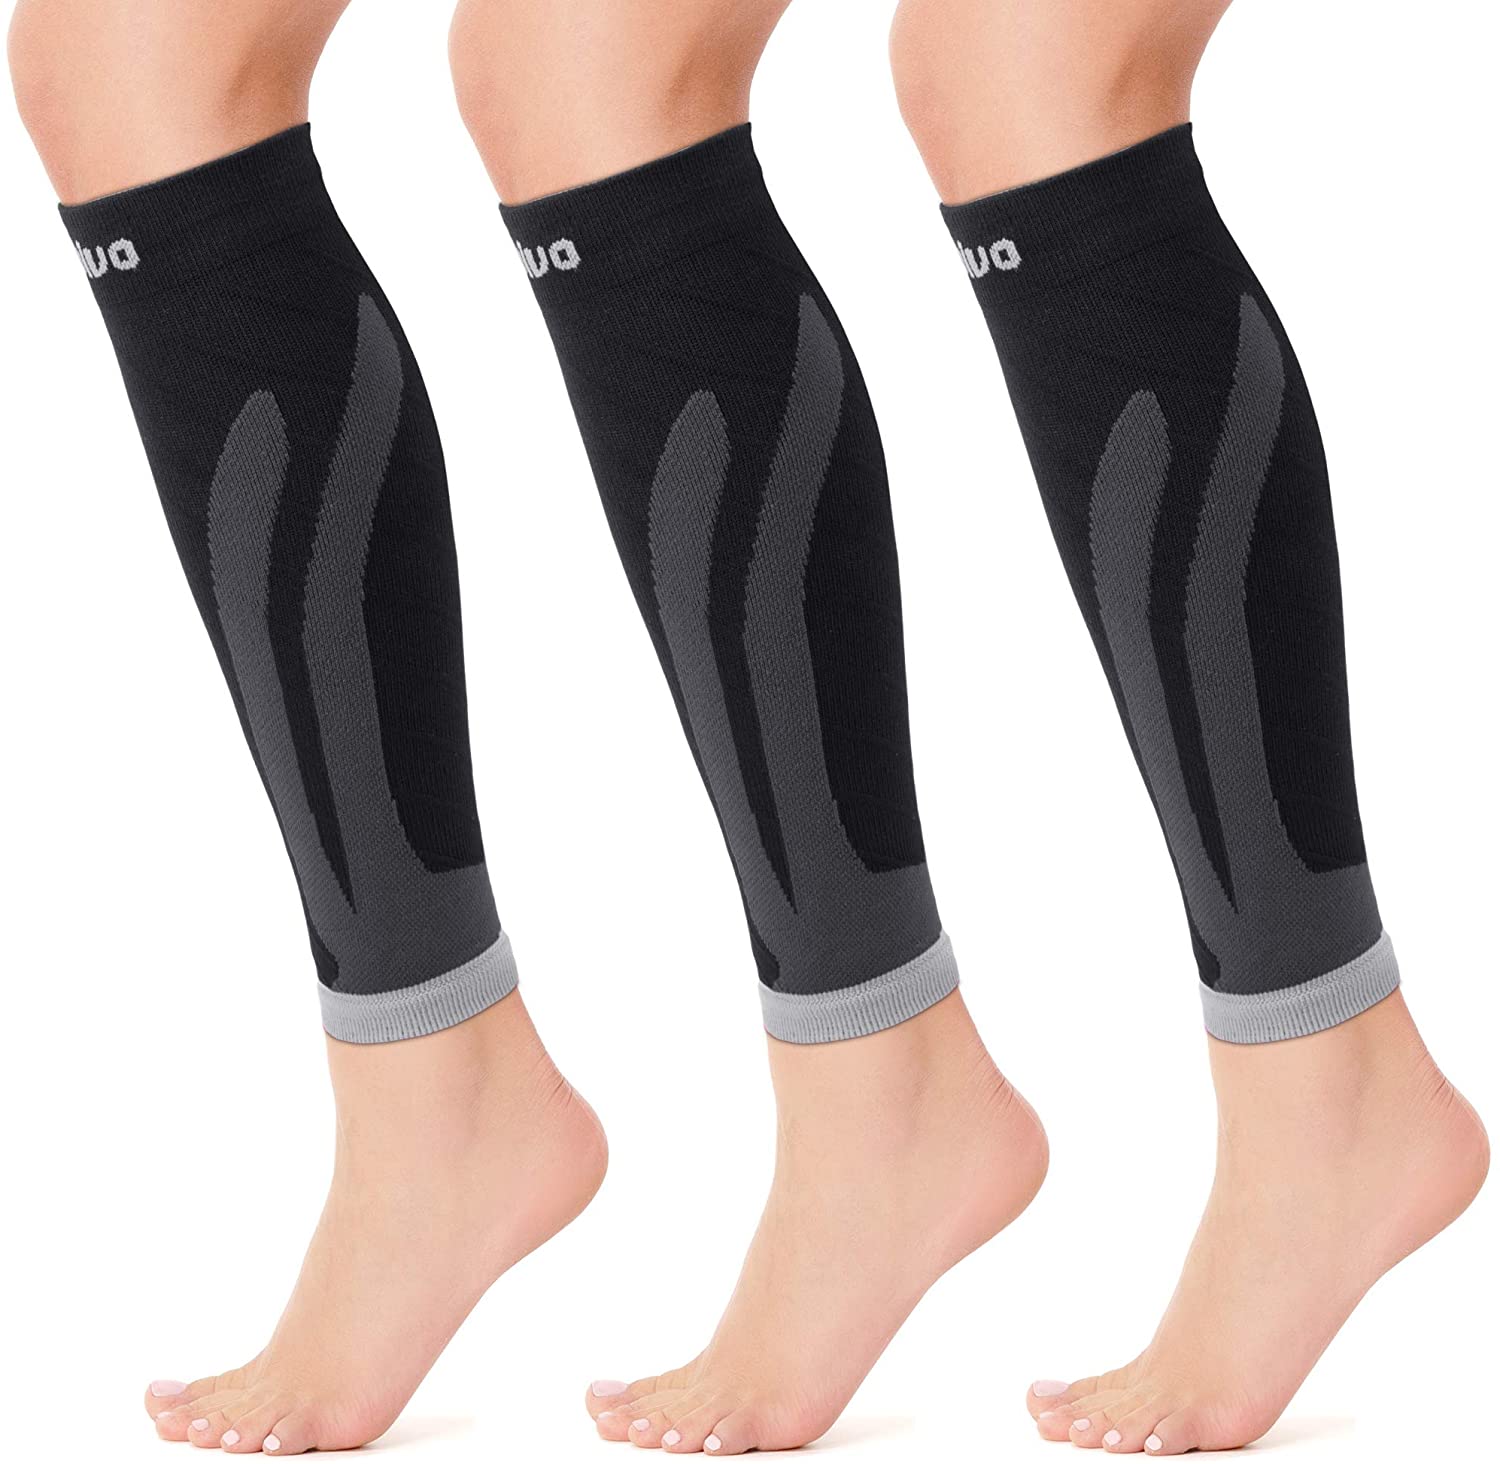  CAMBIVO 3 Pairs Calf Compression Sleeve For Women Men, Leg  Support For Shin Splints, Varicose Vein